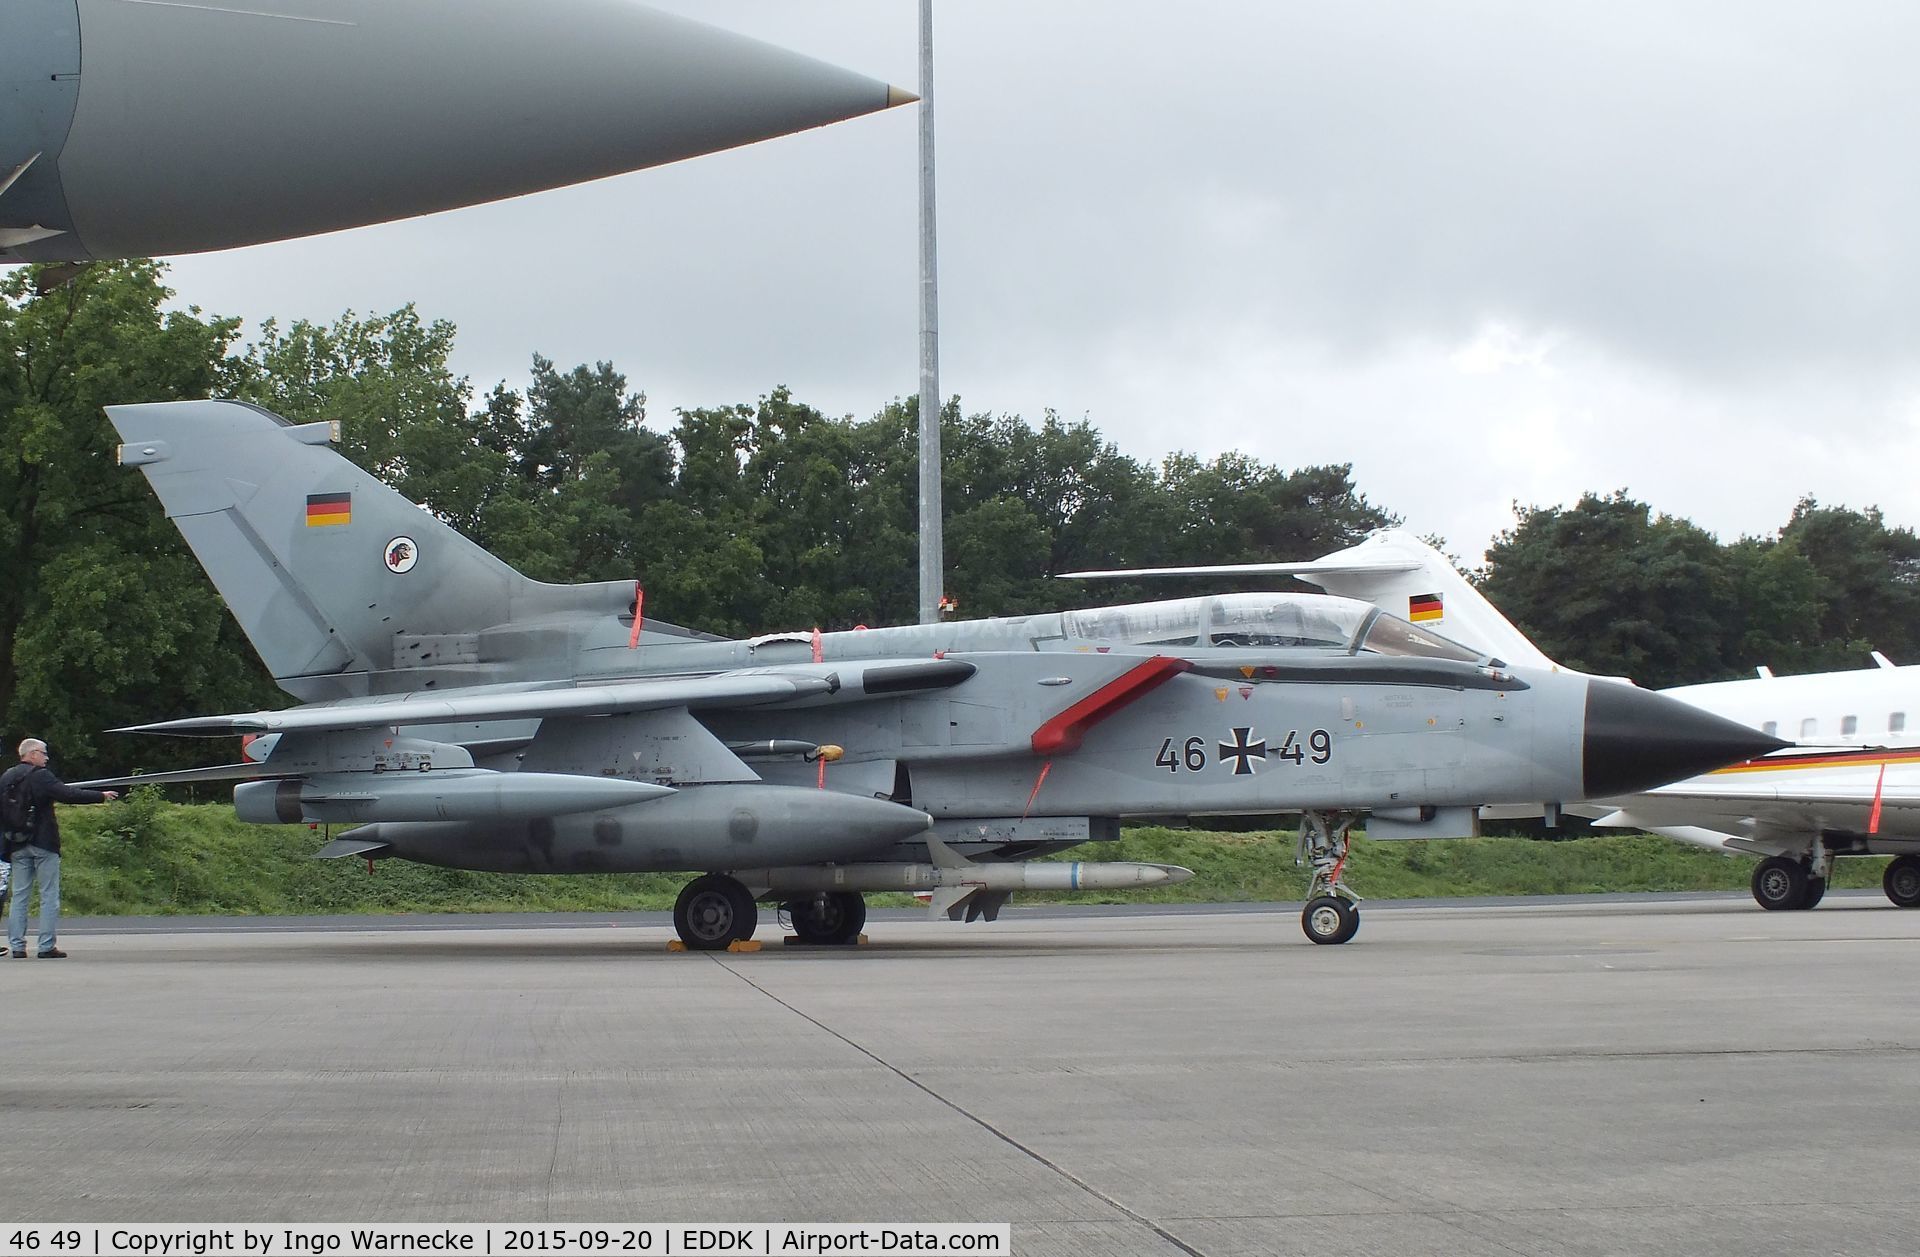 46 49, Panavia Tornado ECR C/N 884/GS282/4349, Panavia Tornado ECR of the Luftwaffe (German Air Force) at the DLR 2015 air and space day on the side of Cologne airport